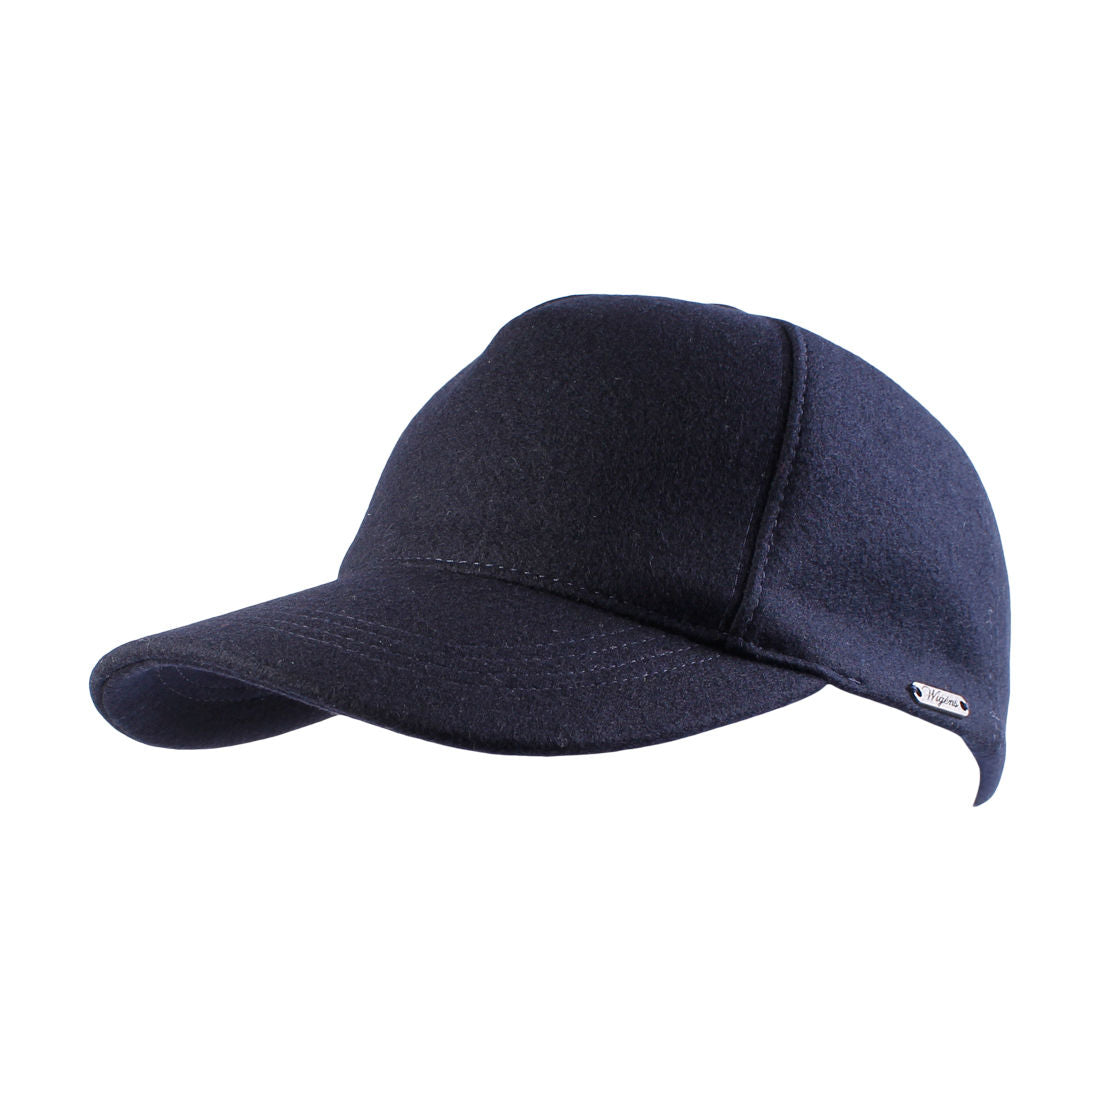 Melton Wool Adjustable Baseball Contemporary Cap (Choice of Colors) by Wigens